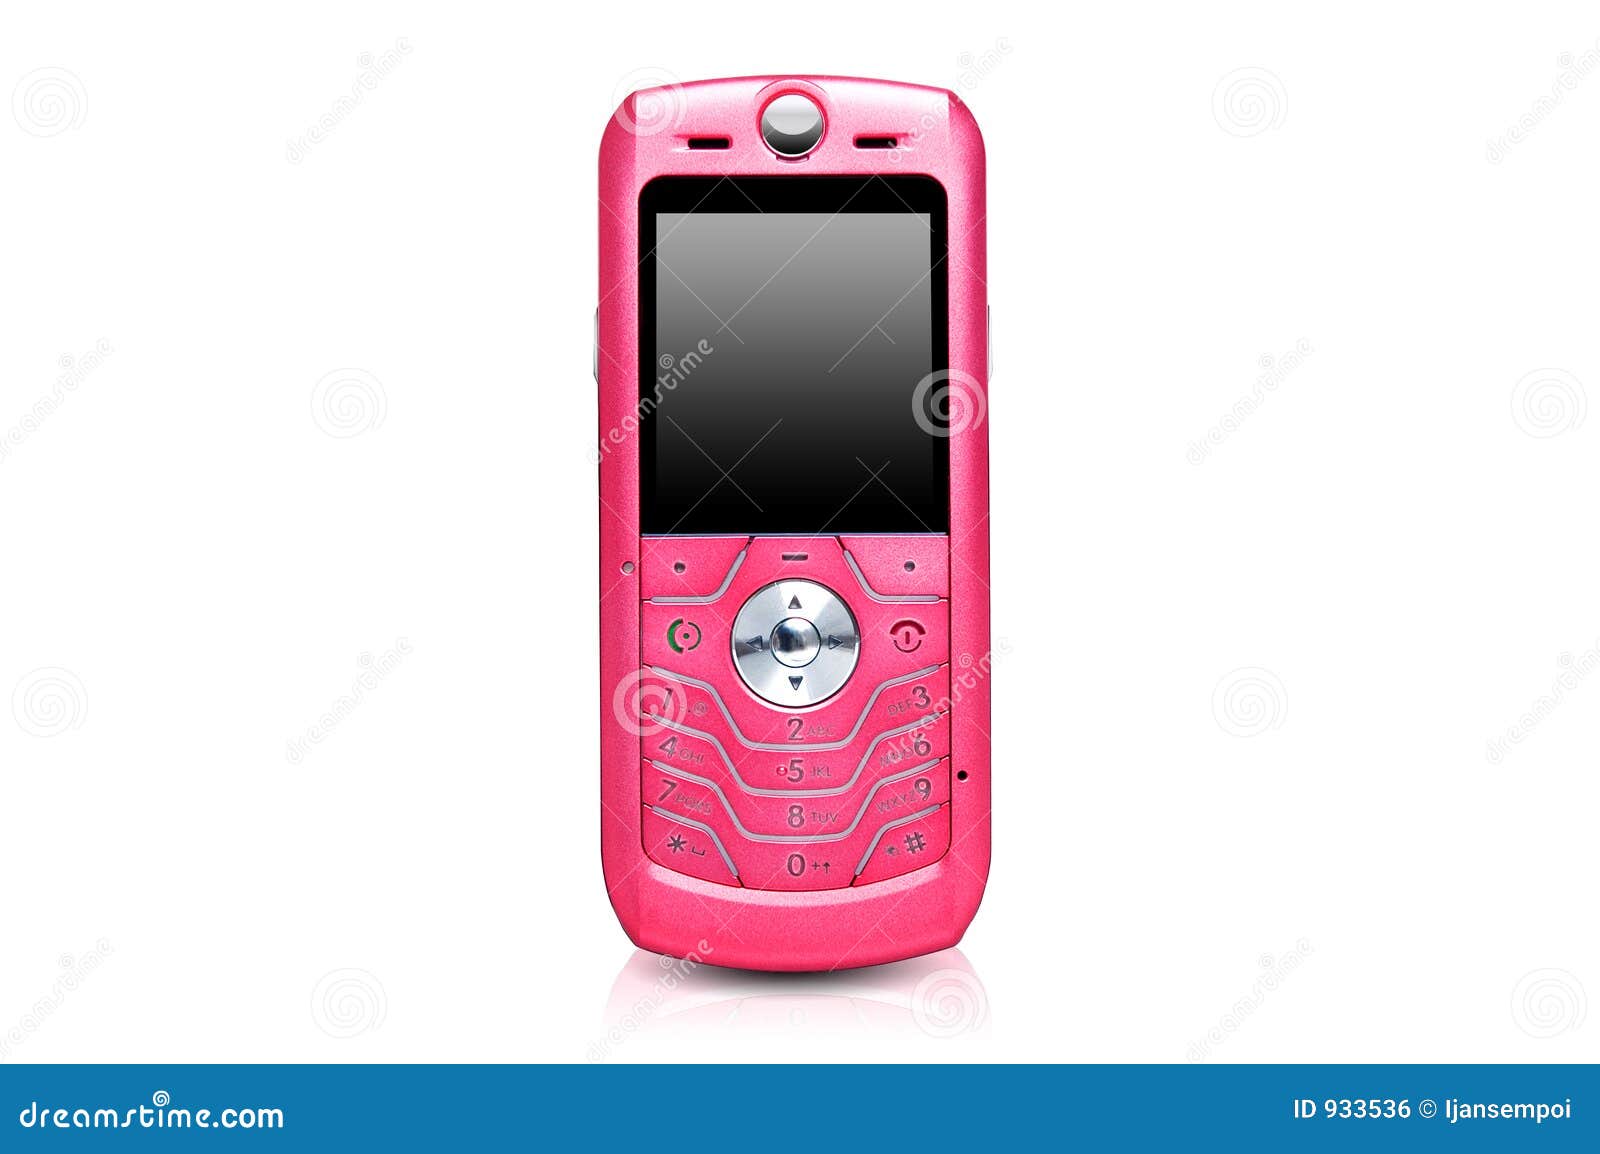 pink mobile phone